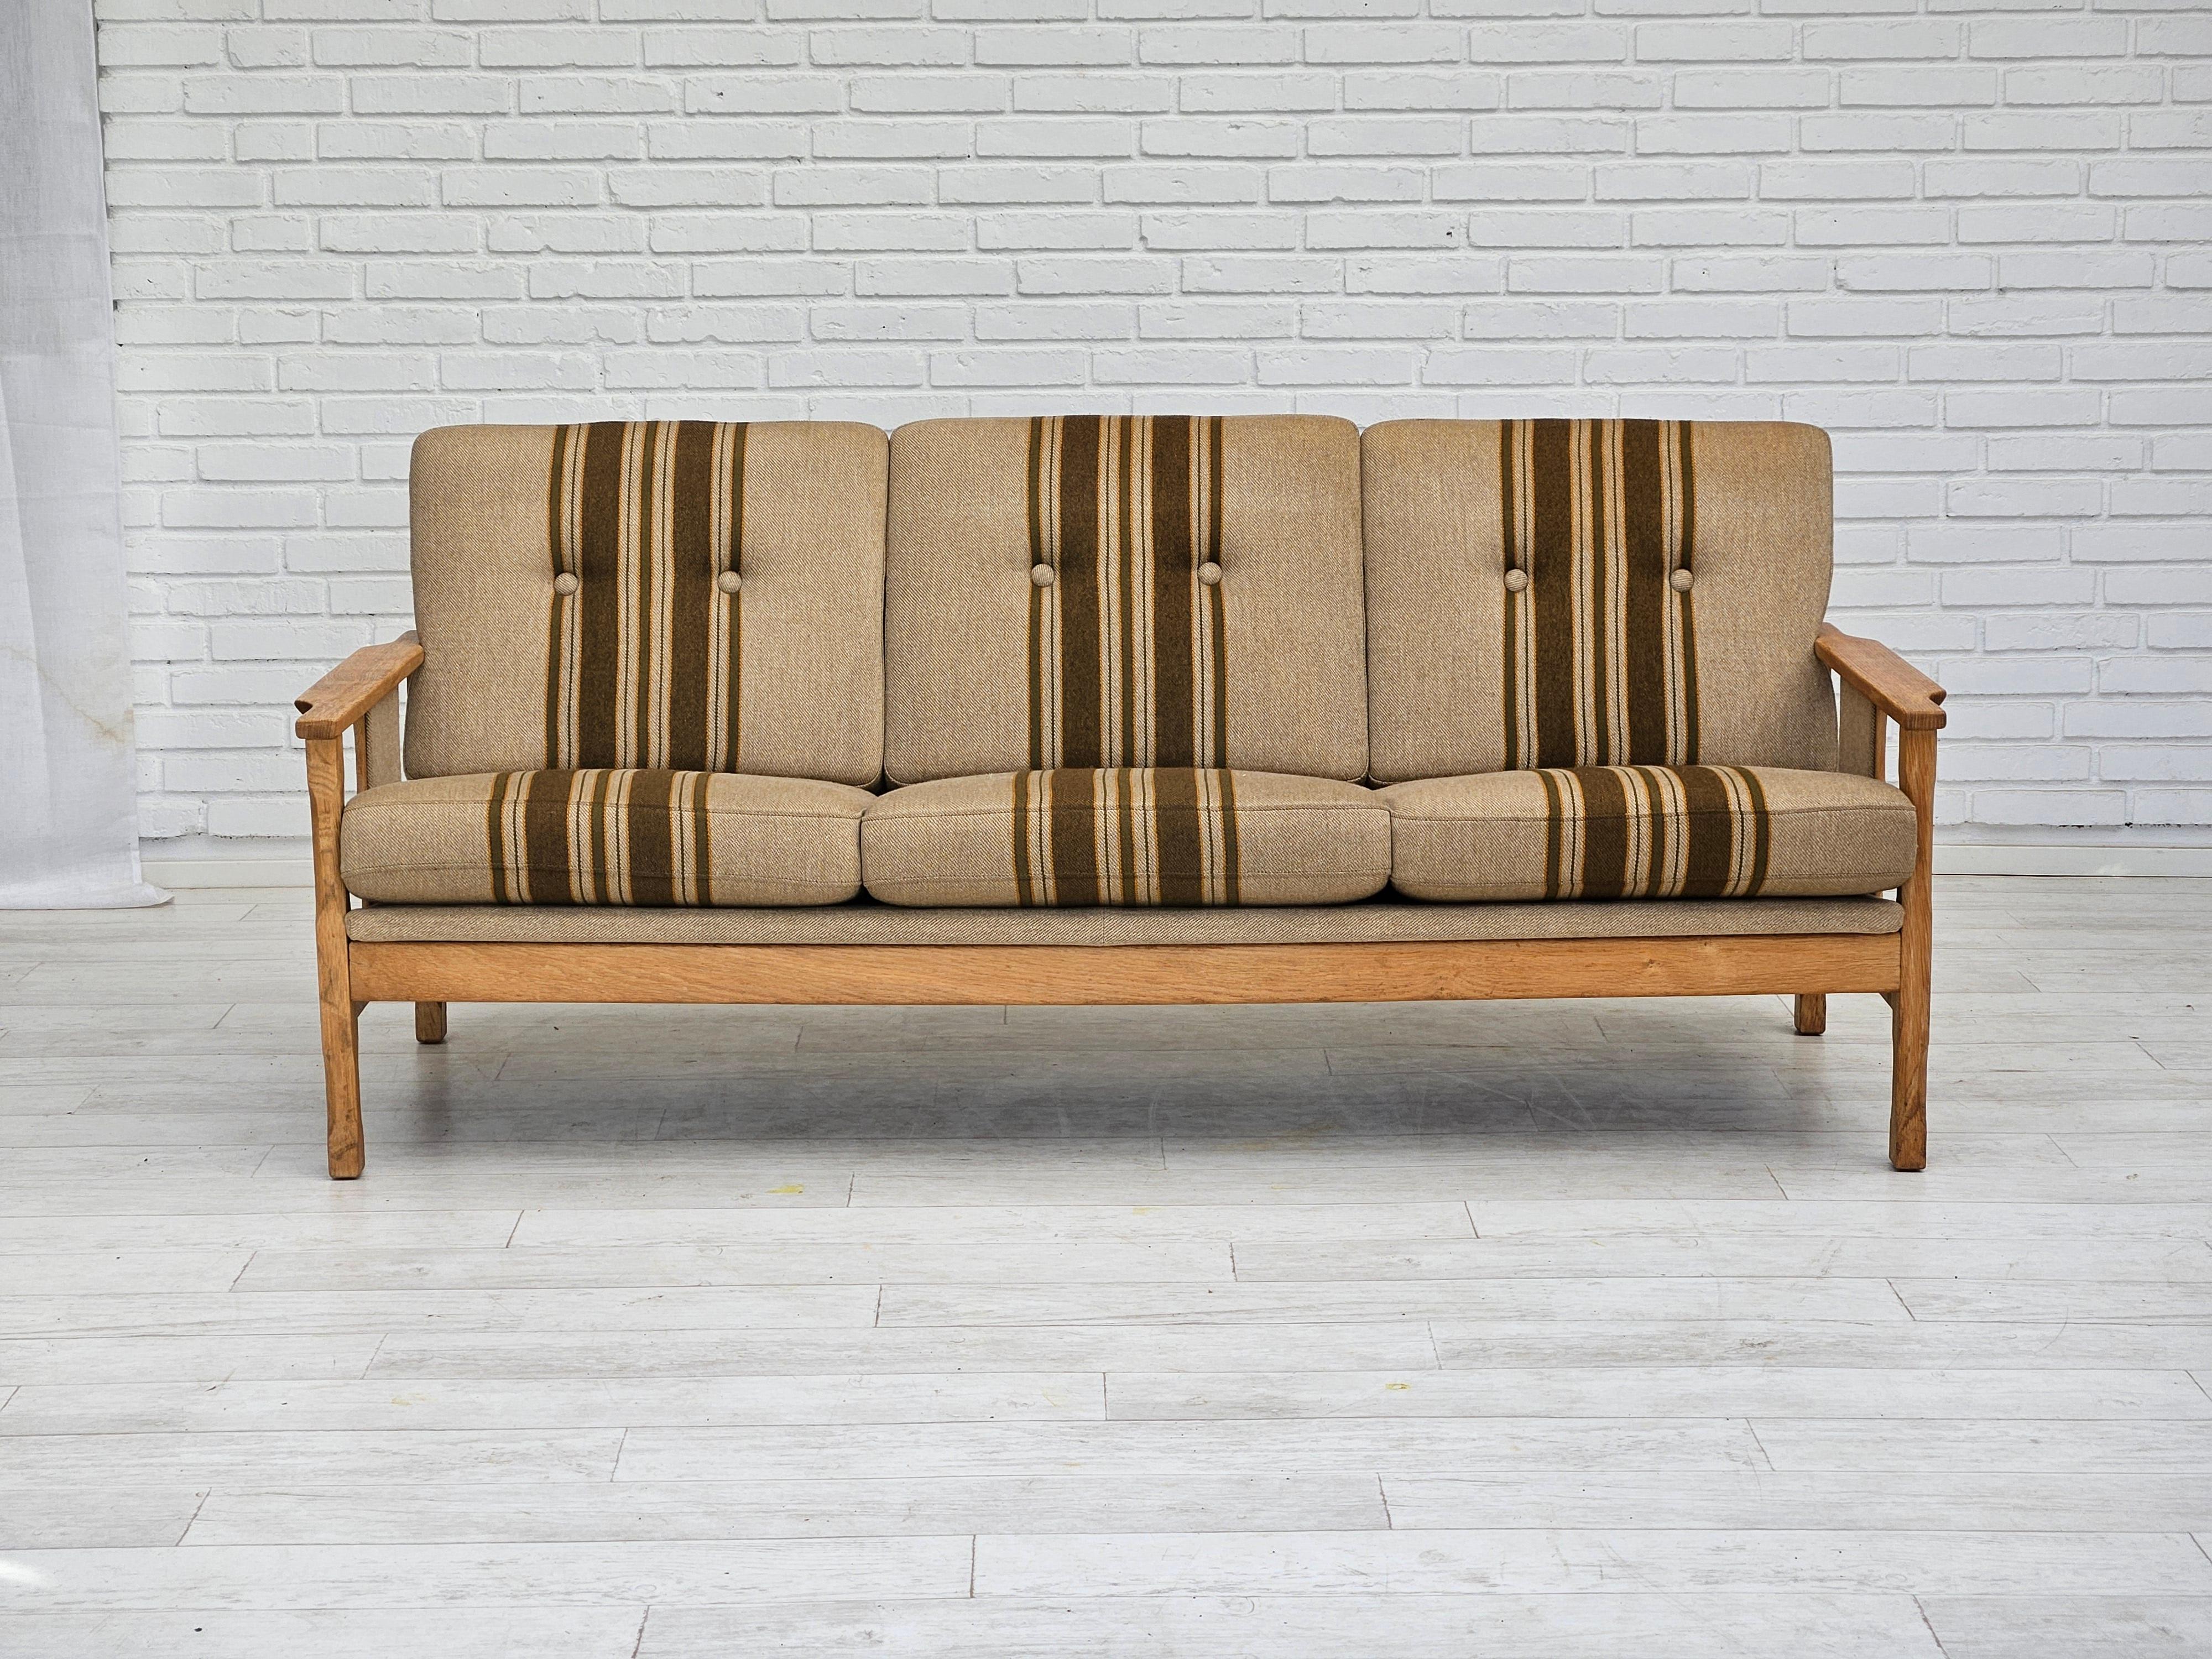 1970s, Danish 3 seater sofa in original very good condition: no smells and no stains. Furniture wool fabric, oak wood. Removable cushions. Manufactured by Danish furniture manufacturer in about 1970s.